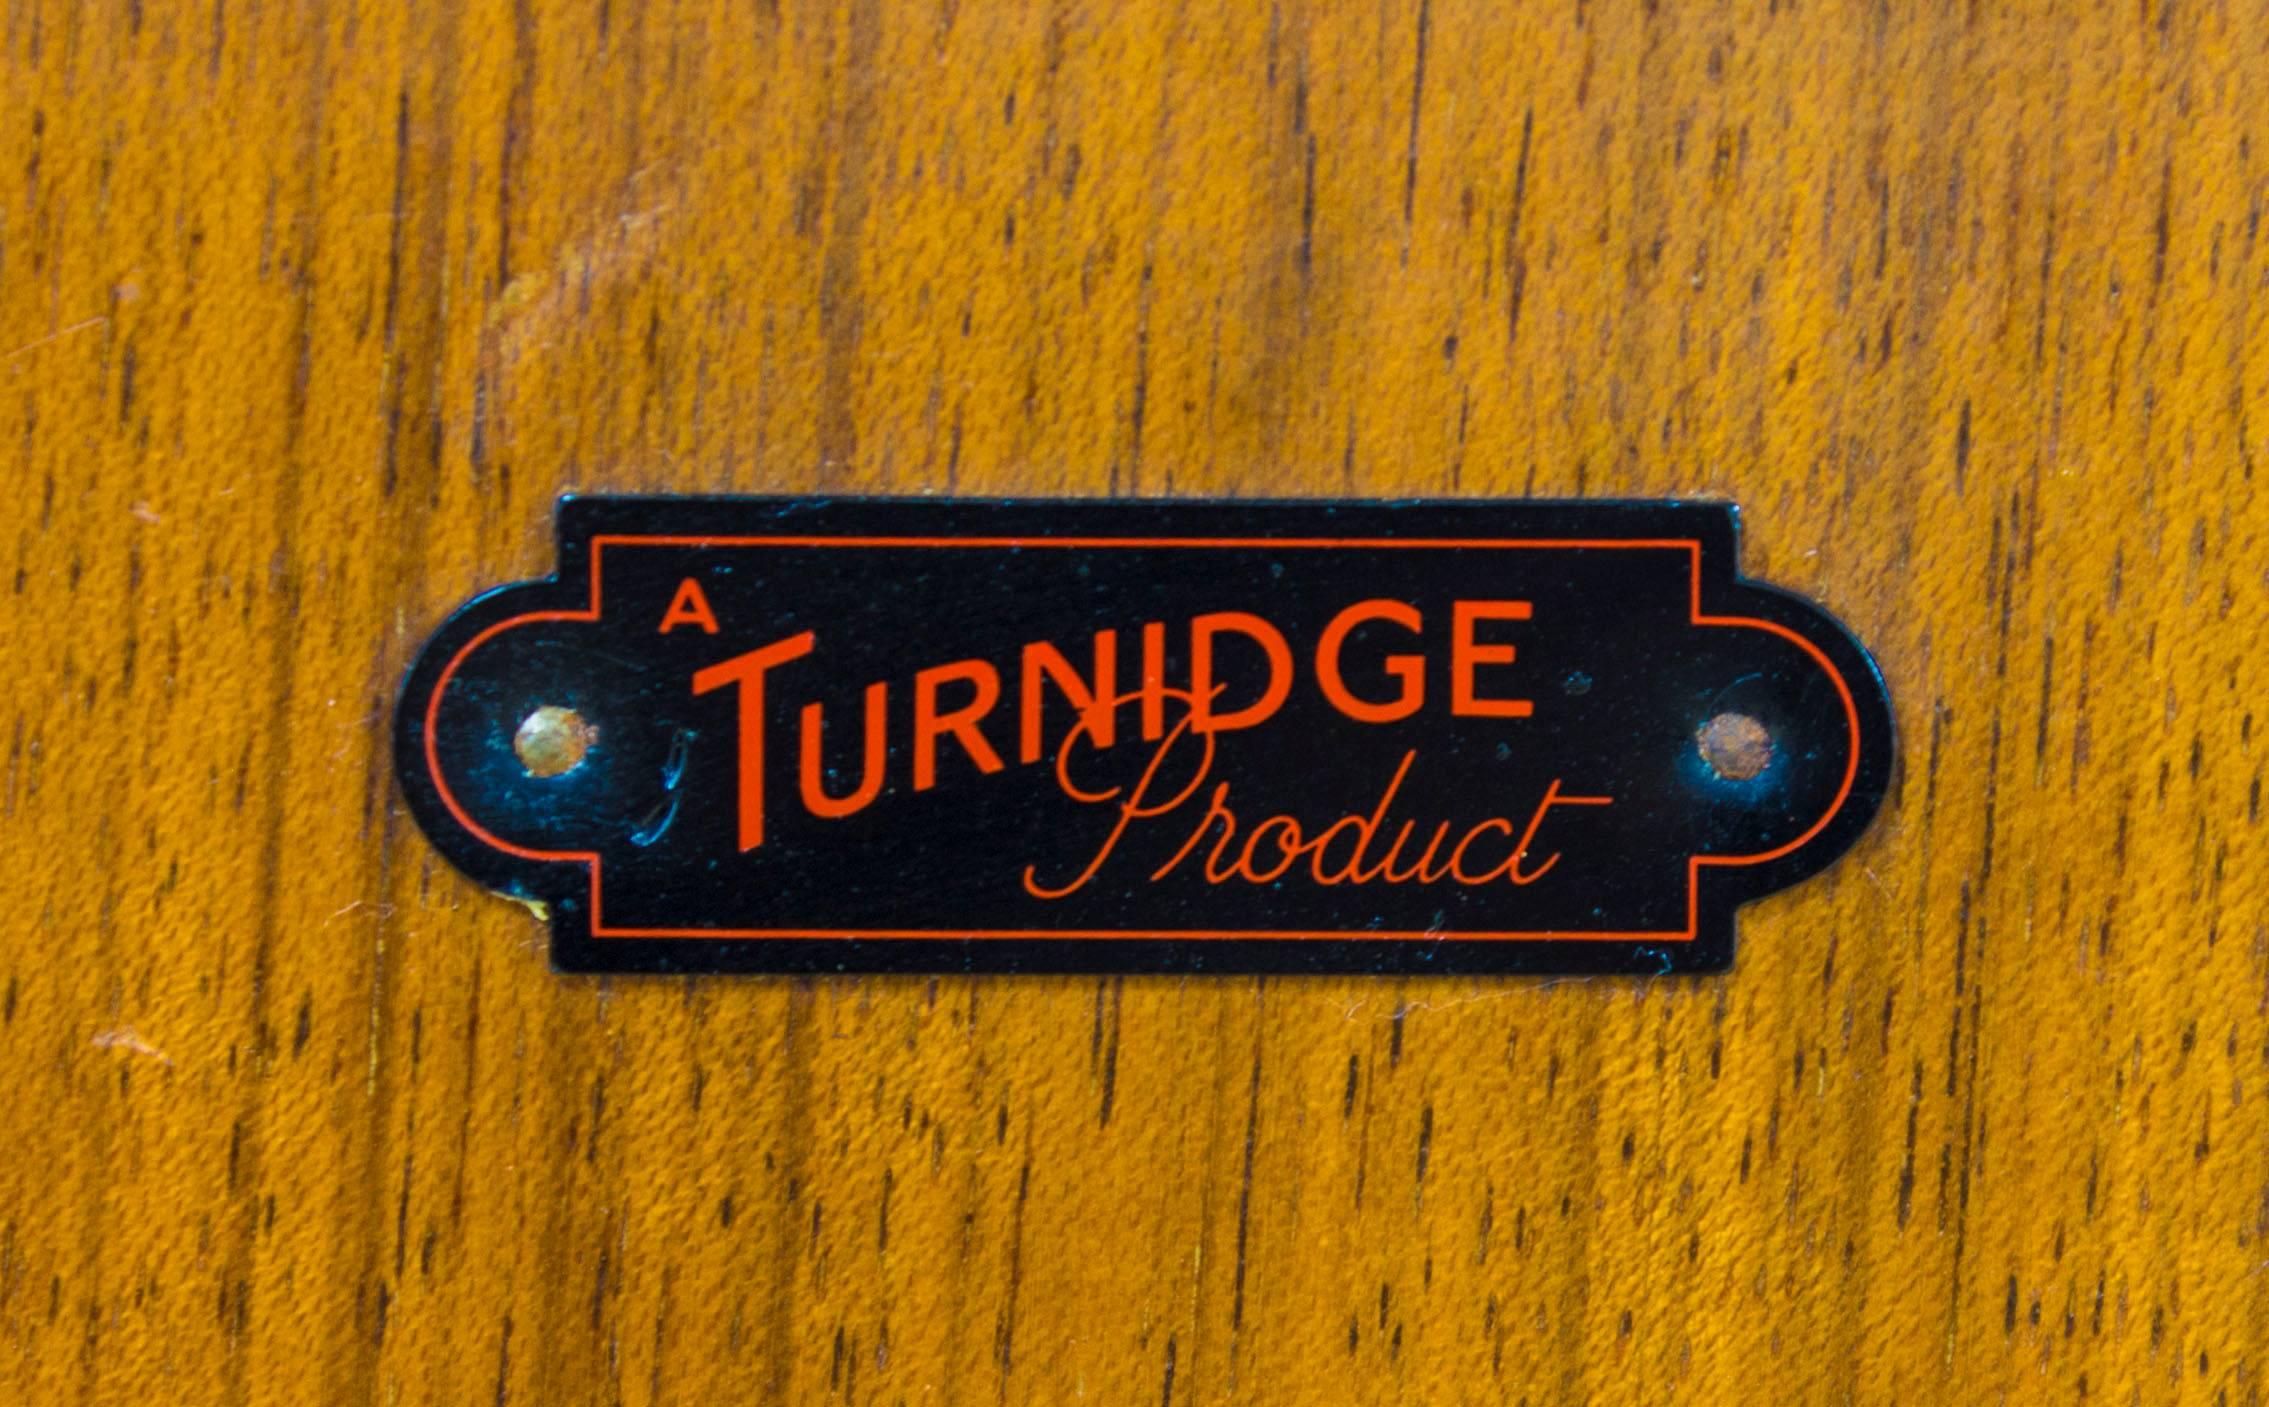 Turnidge of London created stunning furniture ranges from the UK based design studios, taking everyday and popular items and adding a unique and very British twist establishing them as a leader in the early British midcentury market.

This